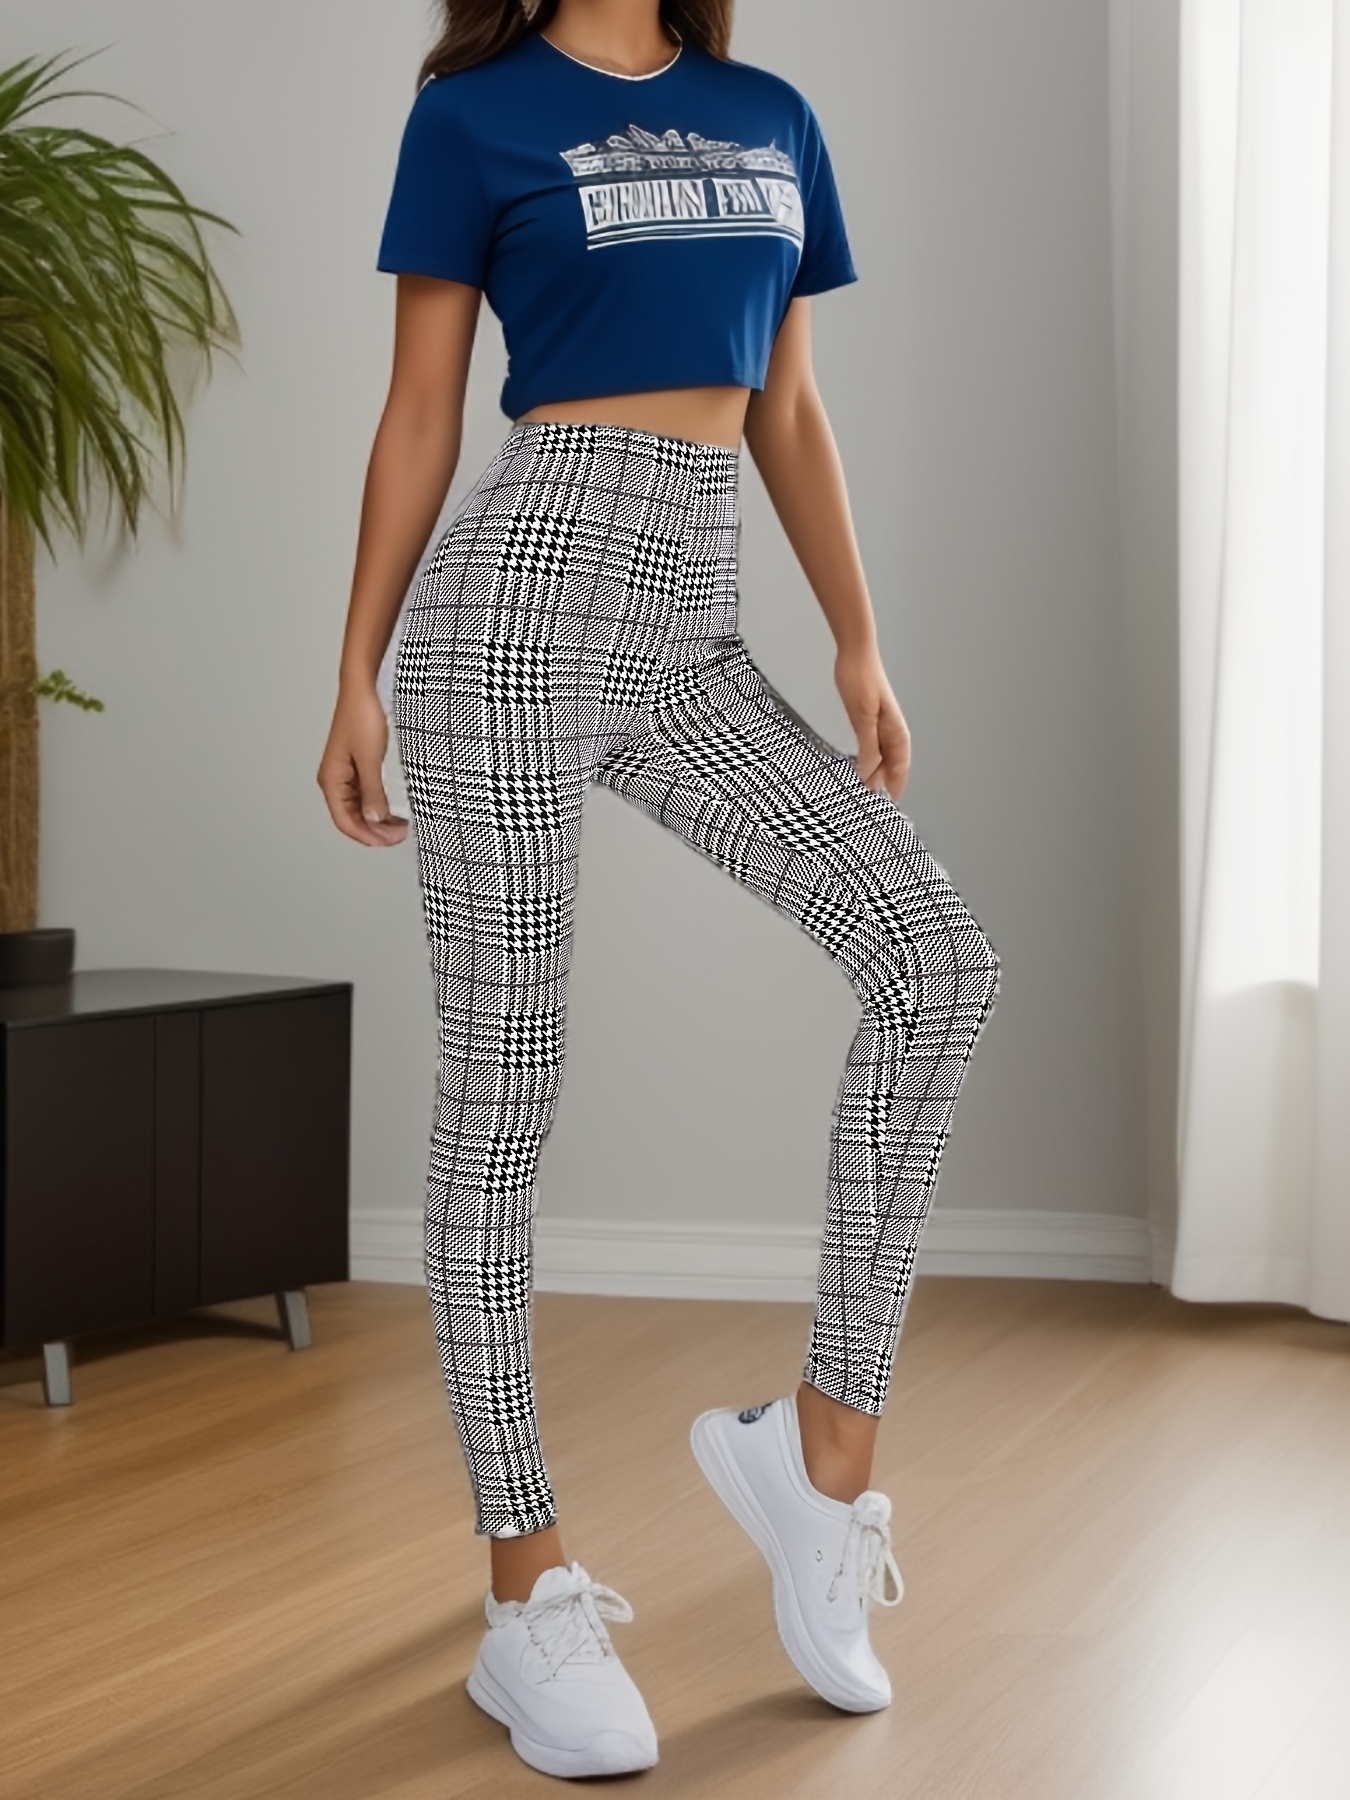 Houndstooth Print Plus Size Houndstooth Leggings For Women High Elastic  Waist, Skinny Pencil Pants In Large Sizes 7XL 8XL 231011 From Bai01, $15.41